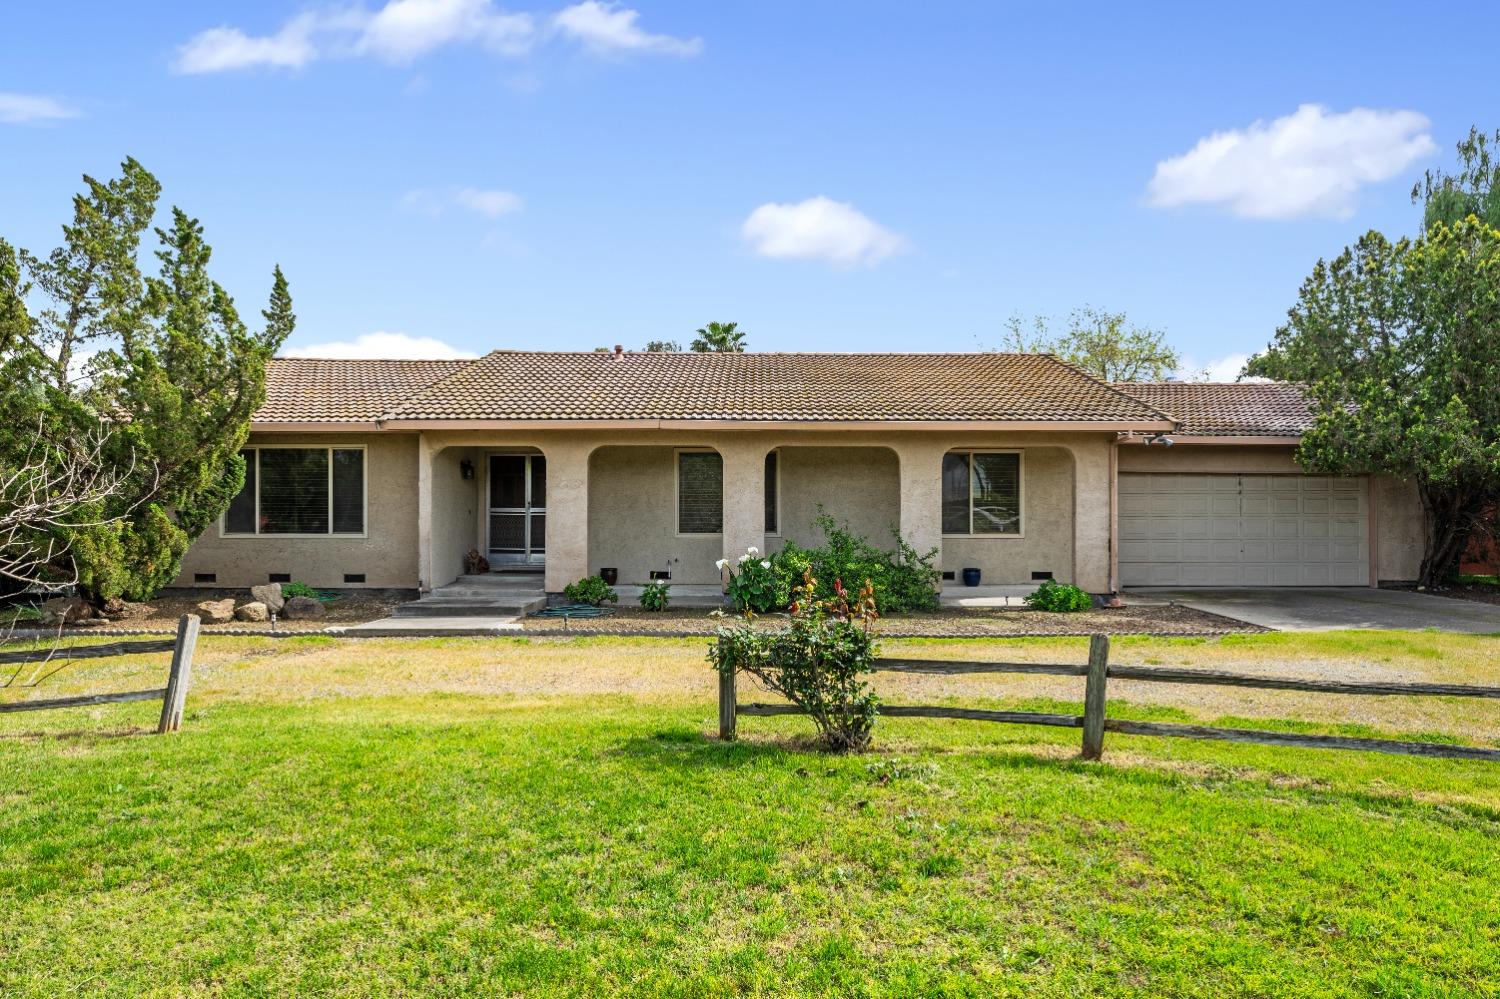 Photo of 16046 Redondo Dr in Tracy, CA